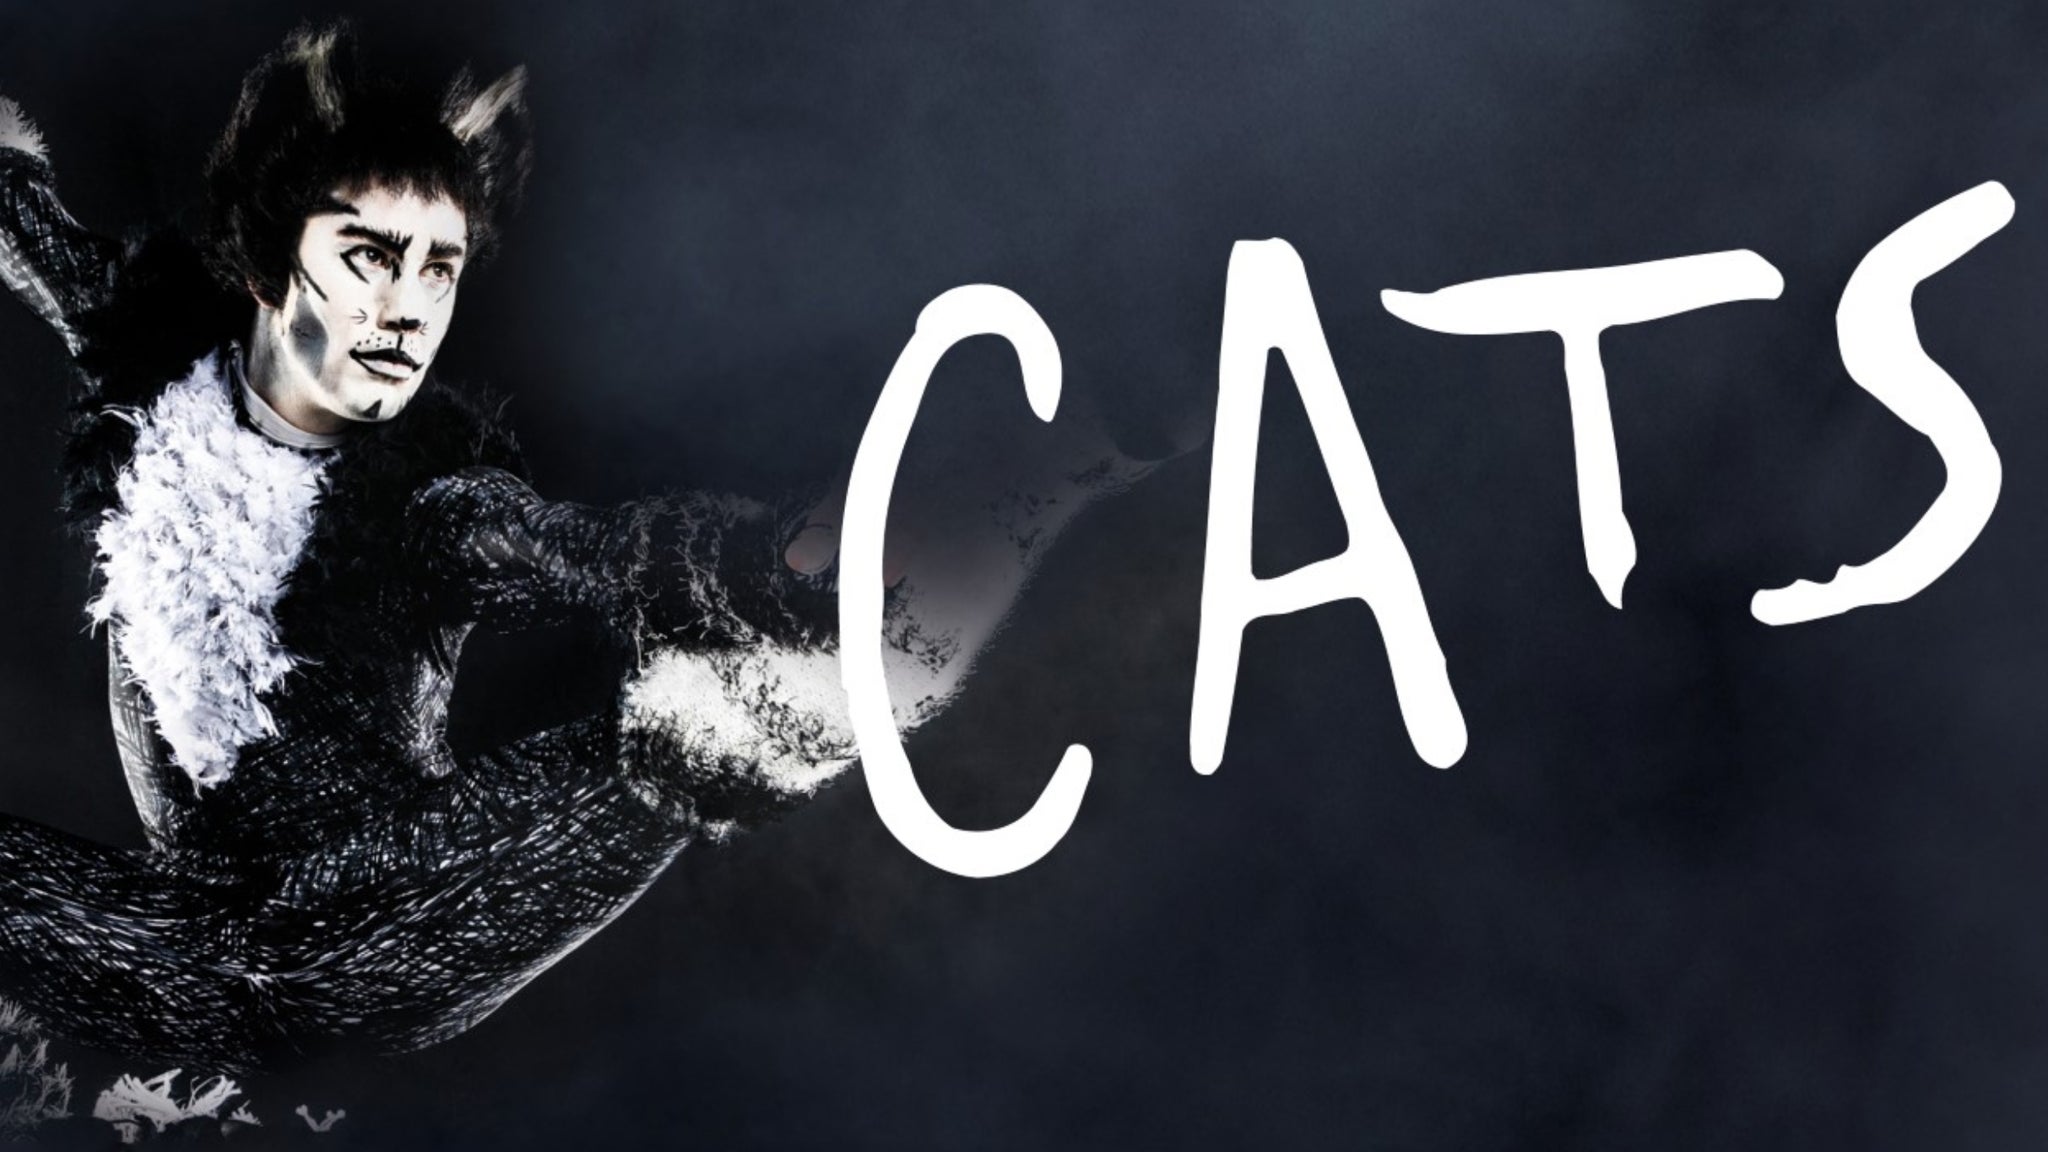 Cats in Washington promo photo for Certifikid presale offer code